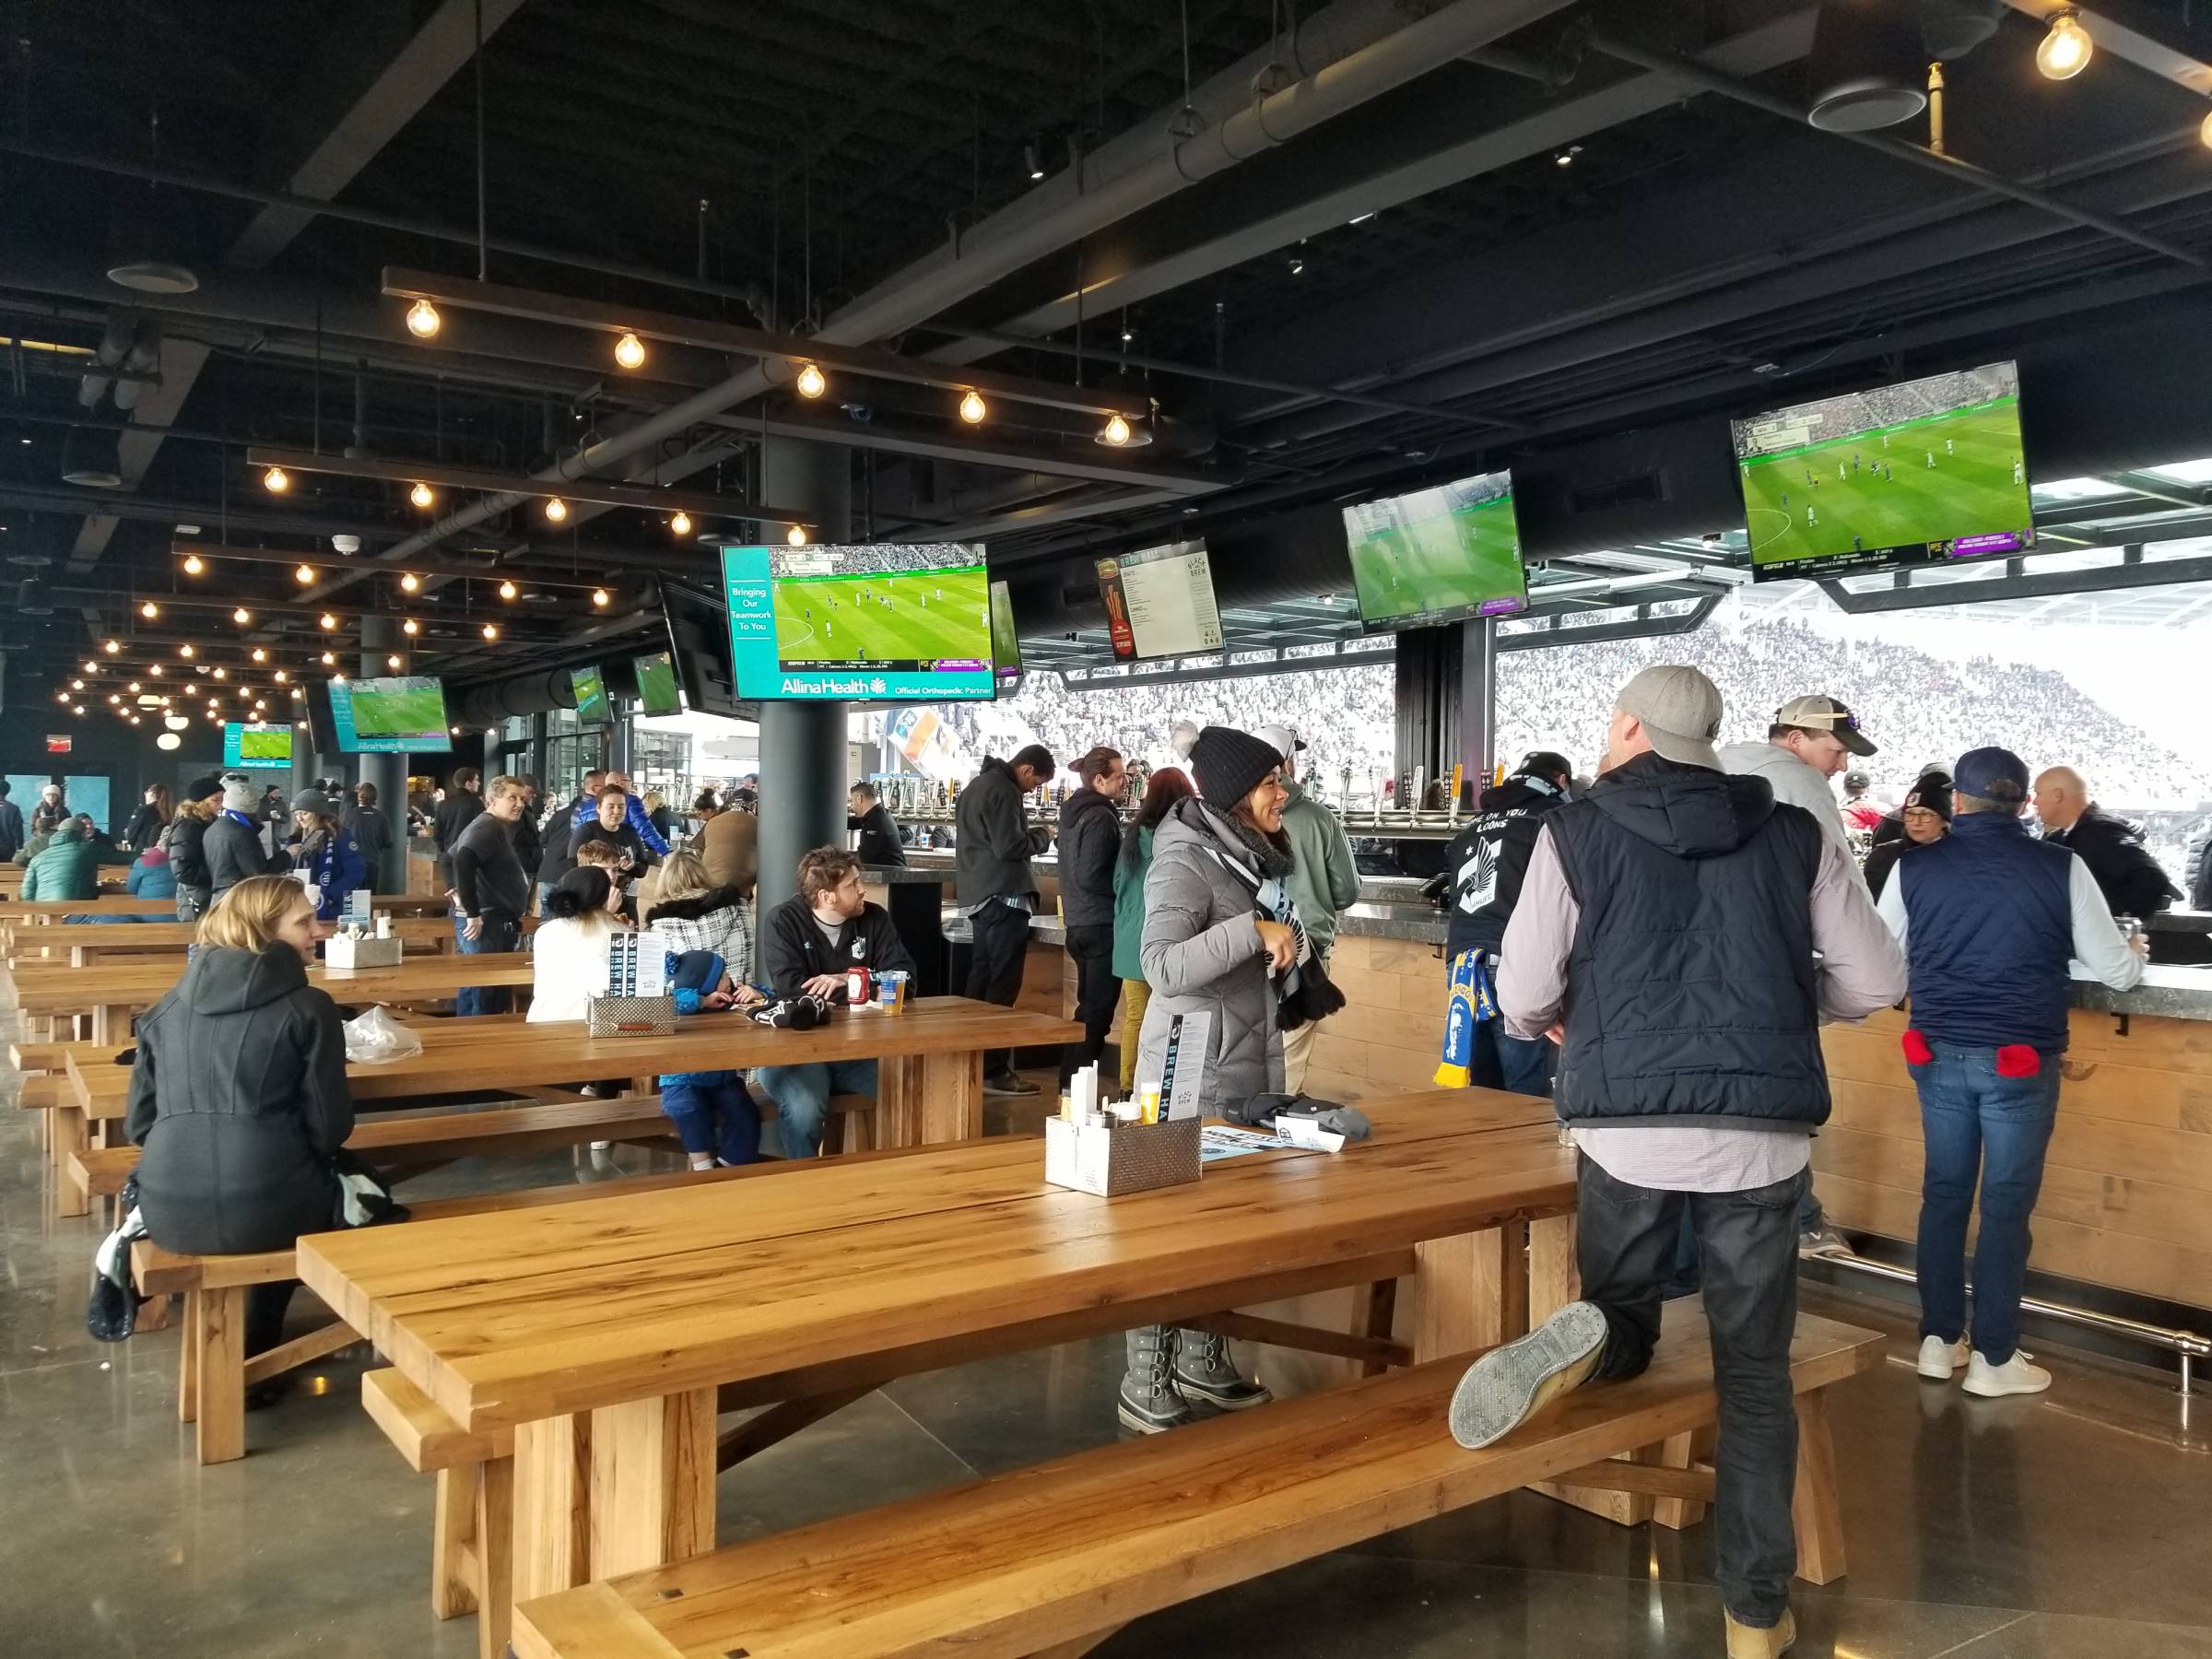 Inside the Brew Hall at Allianz Field